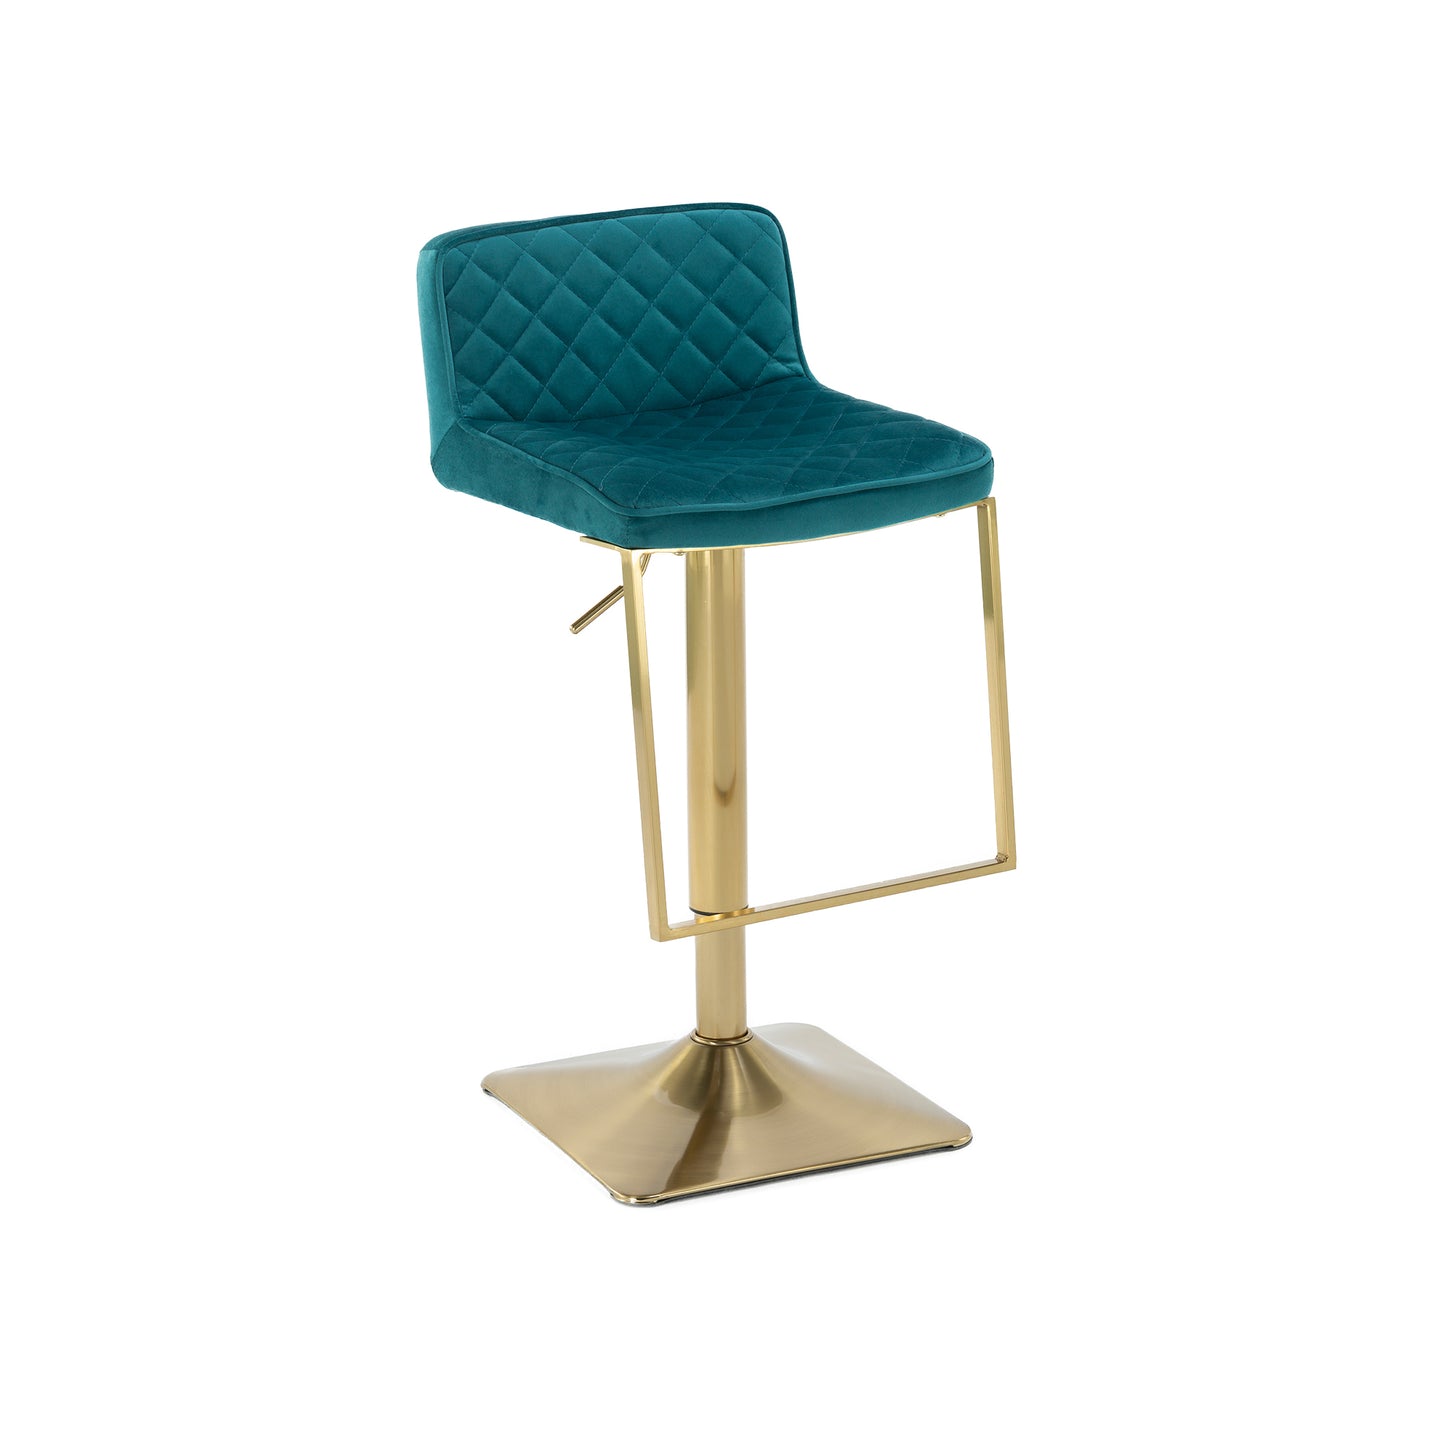 Bar Stool for Home or Office Use